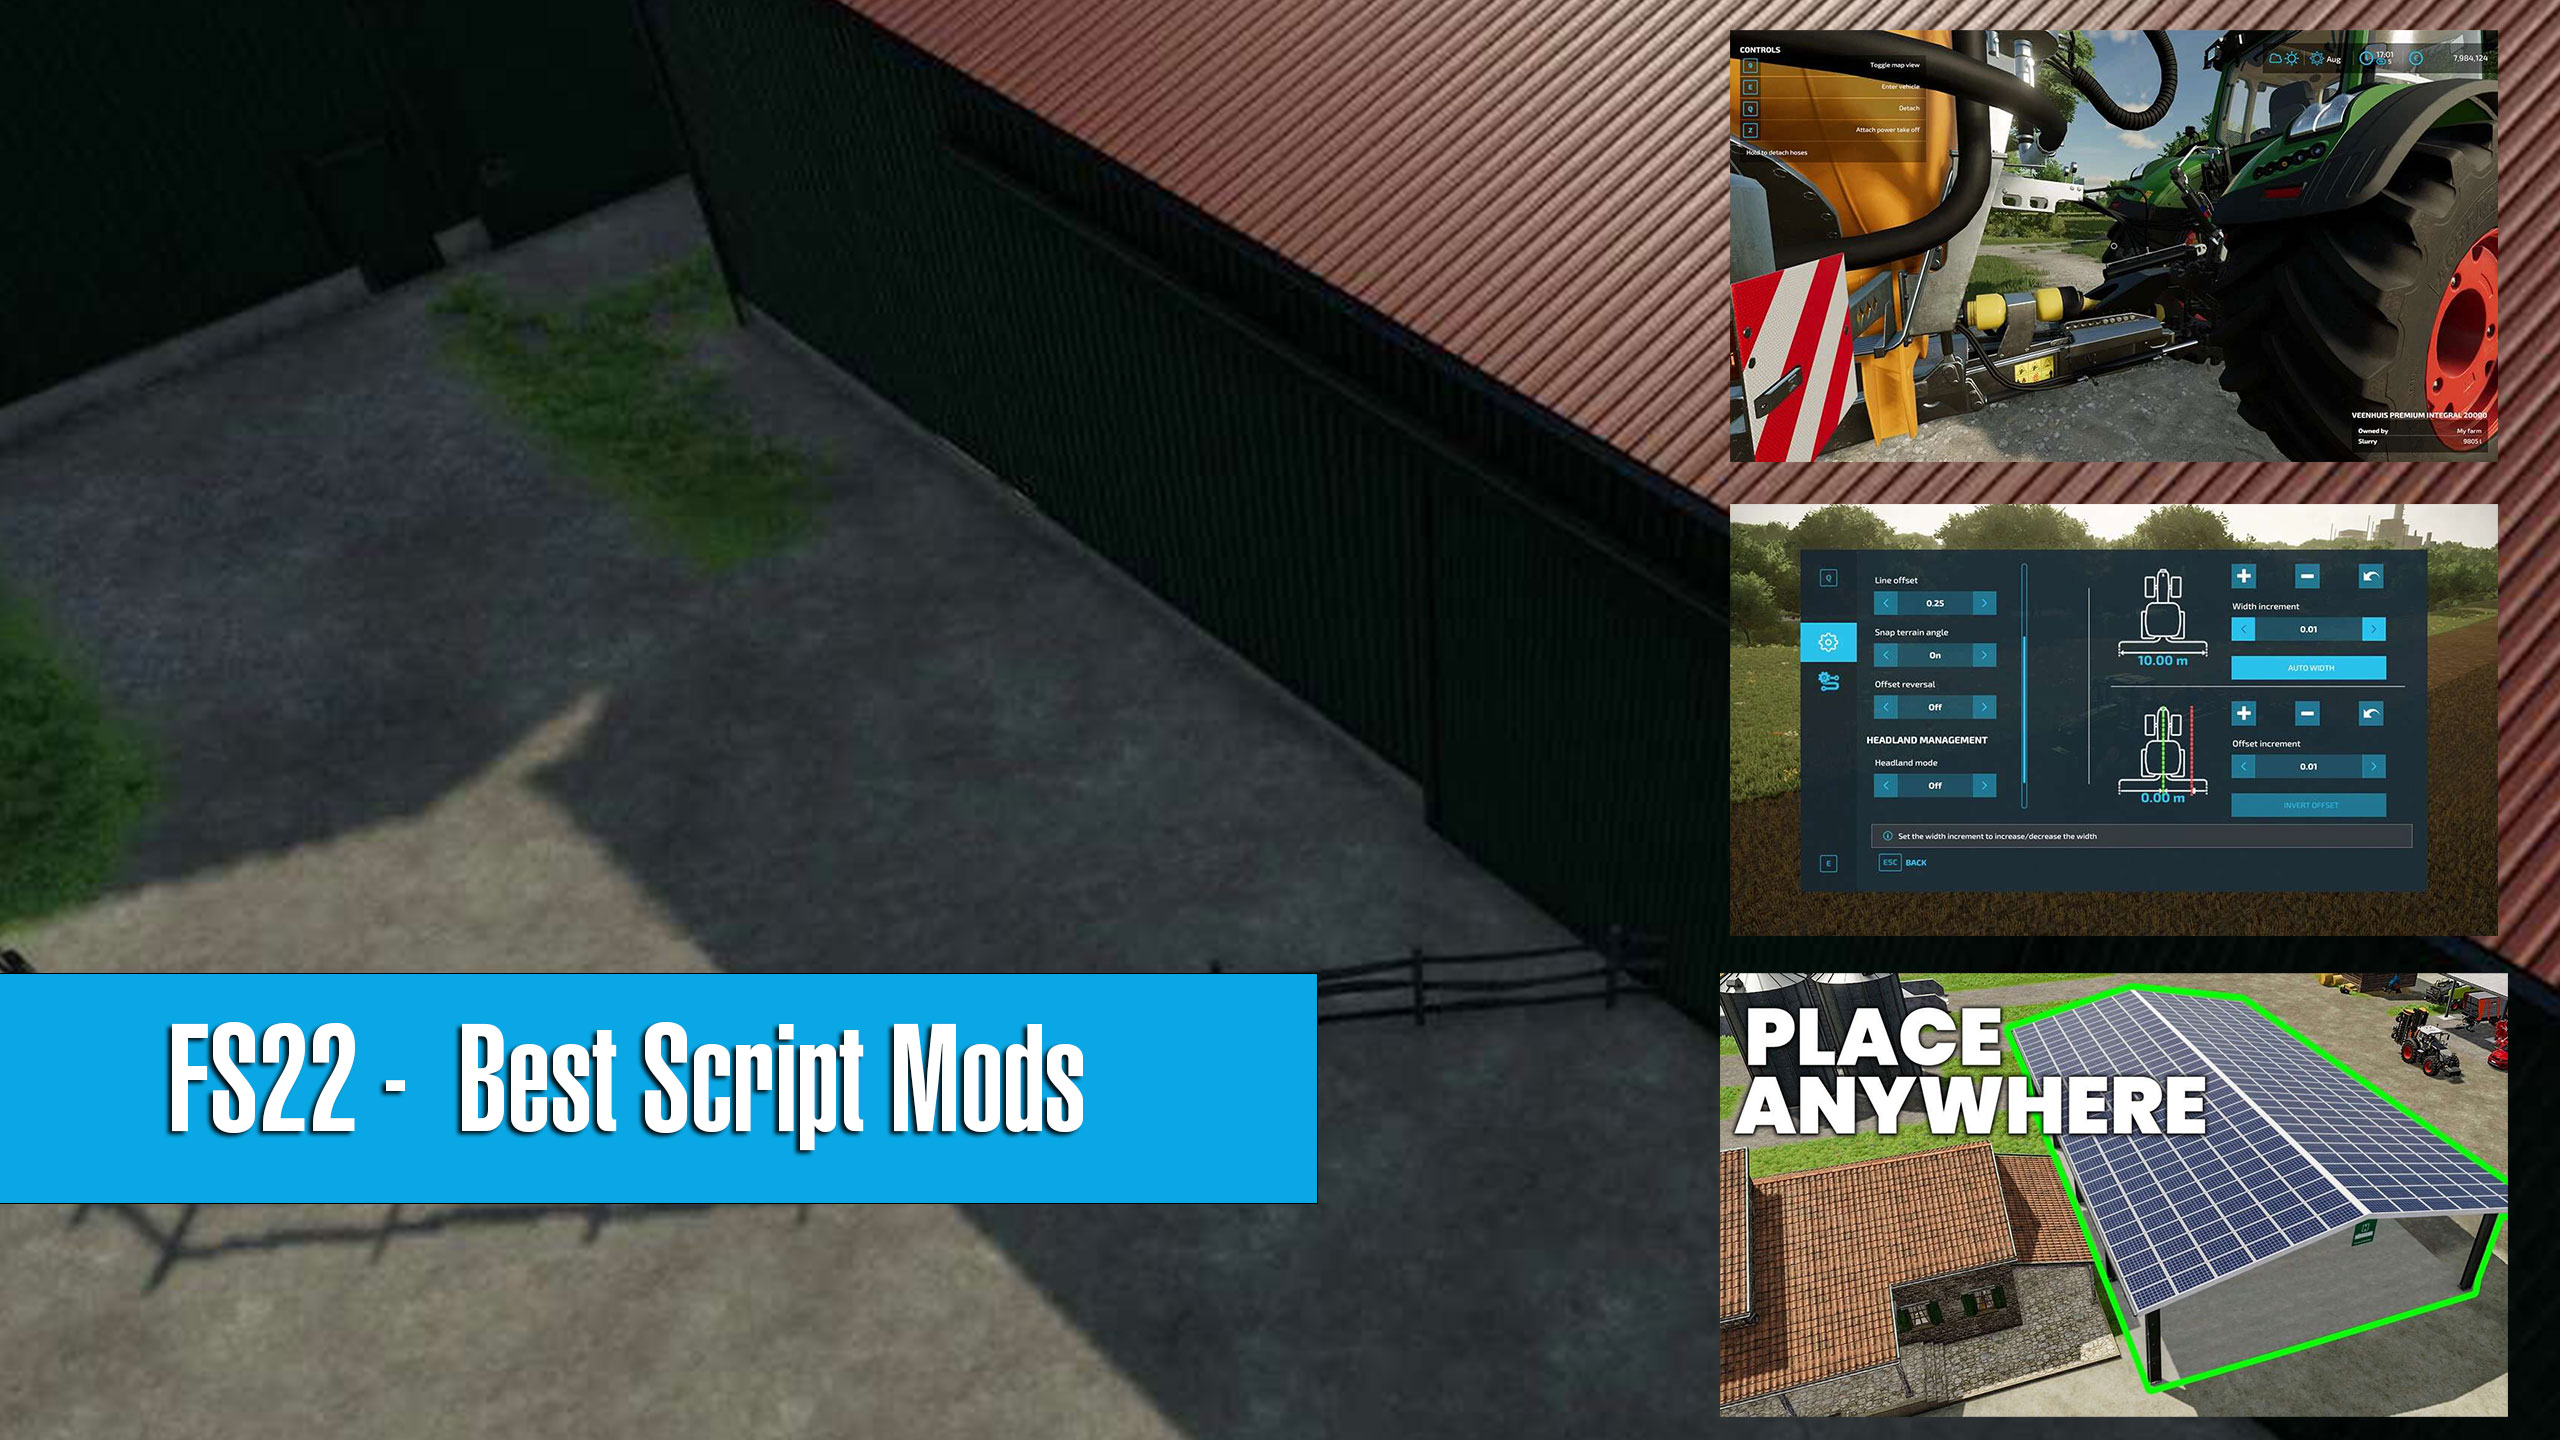 The 8 Farming Simulator 22 Best Mods You Should Try Today - Cheat Code  Central